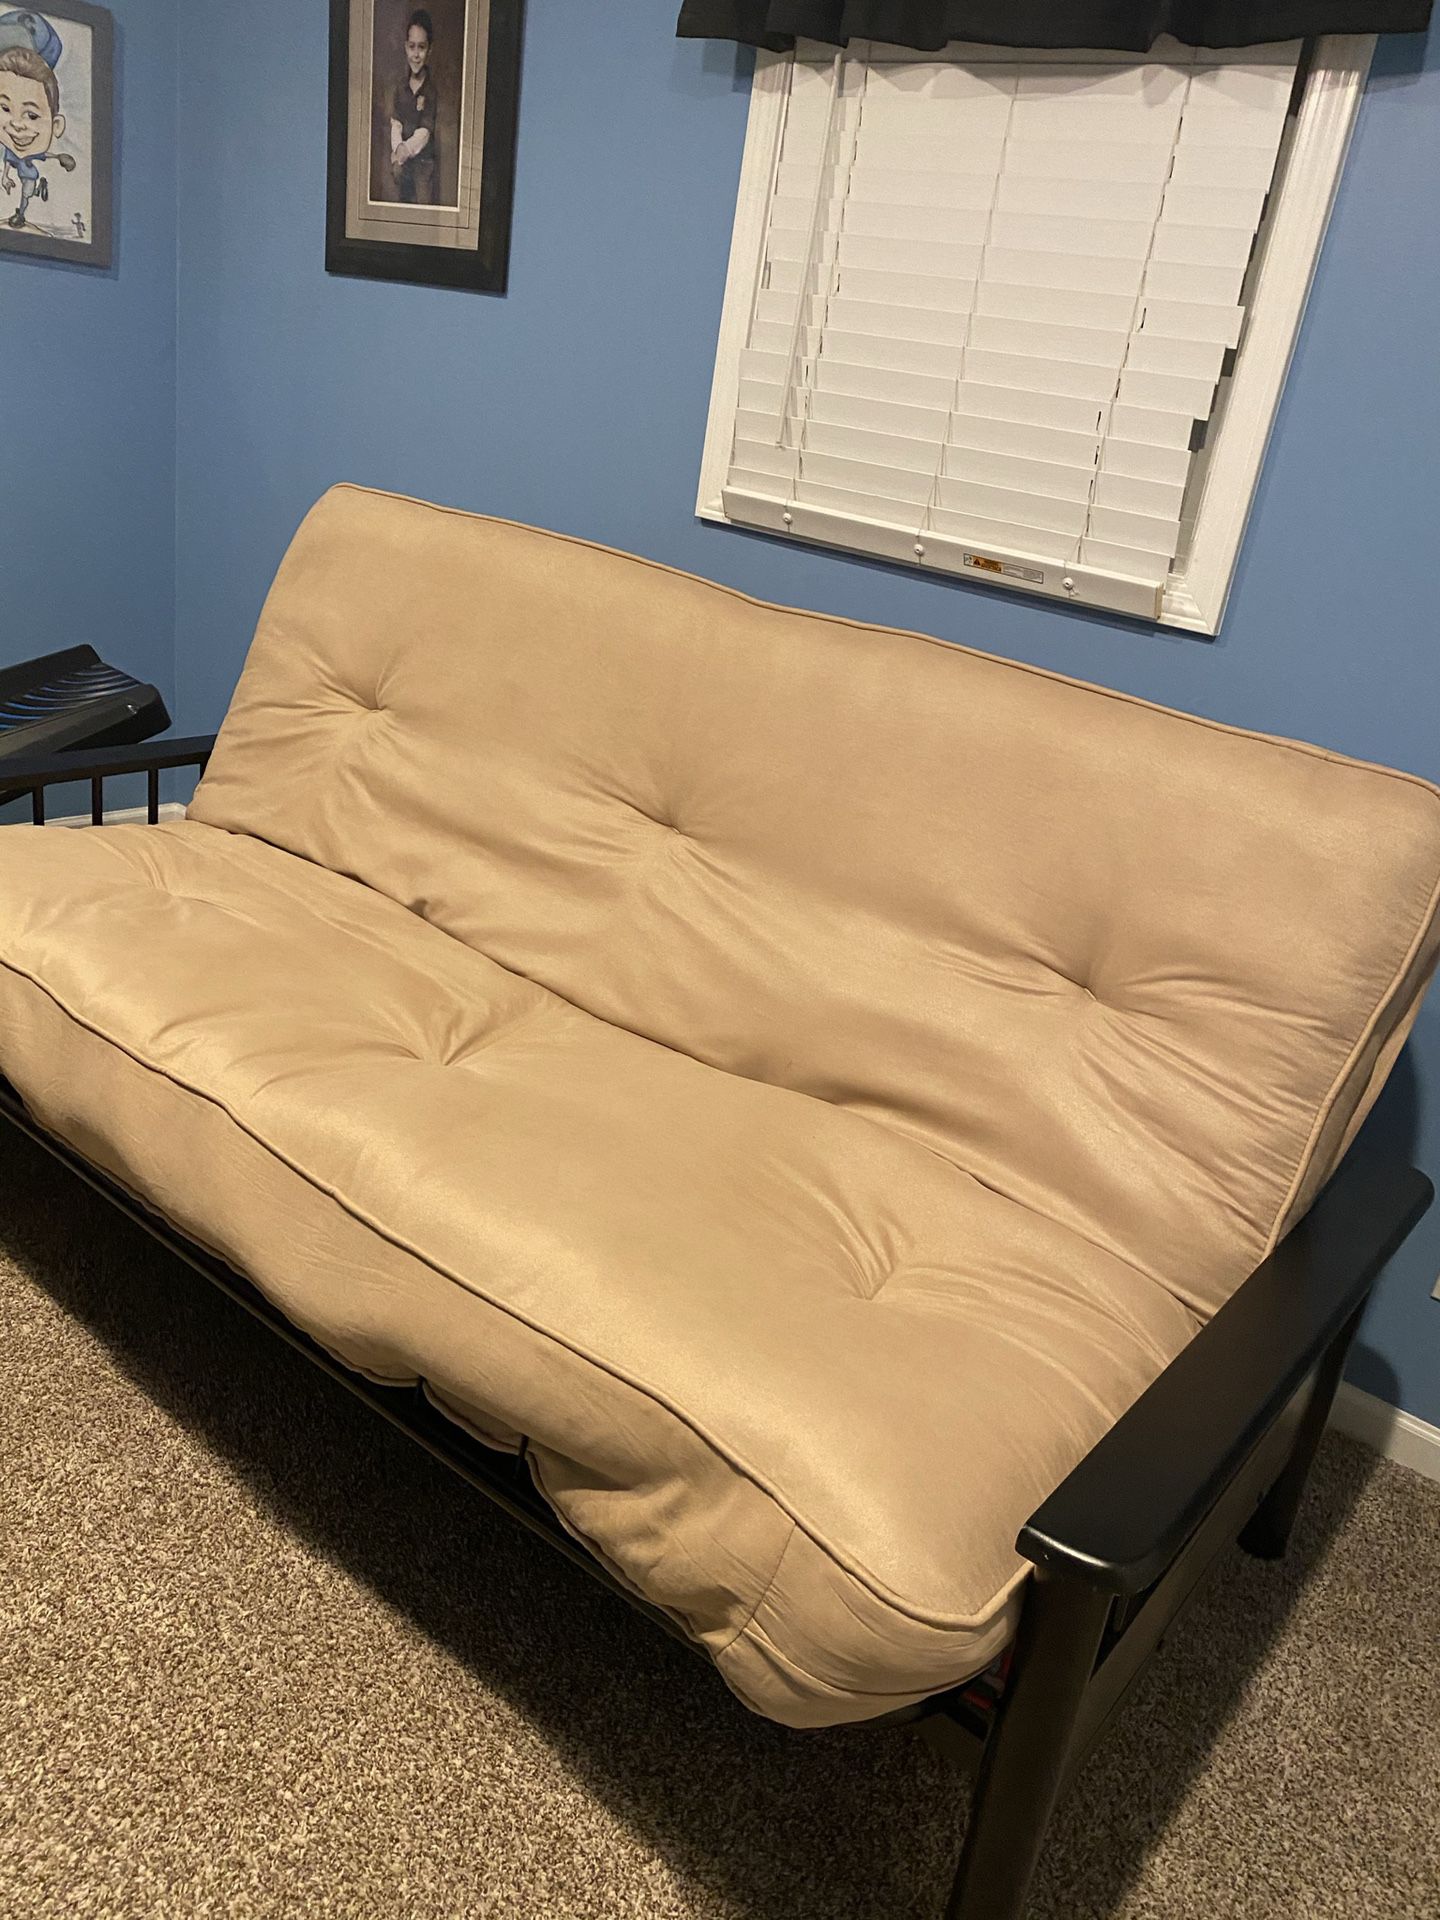 Full size futon and couch. New. Bought - not used. All included